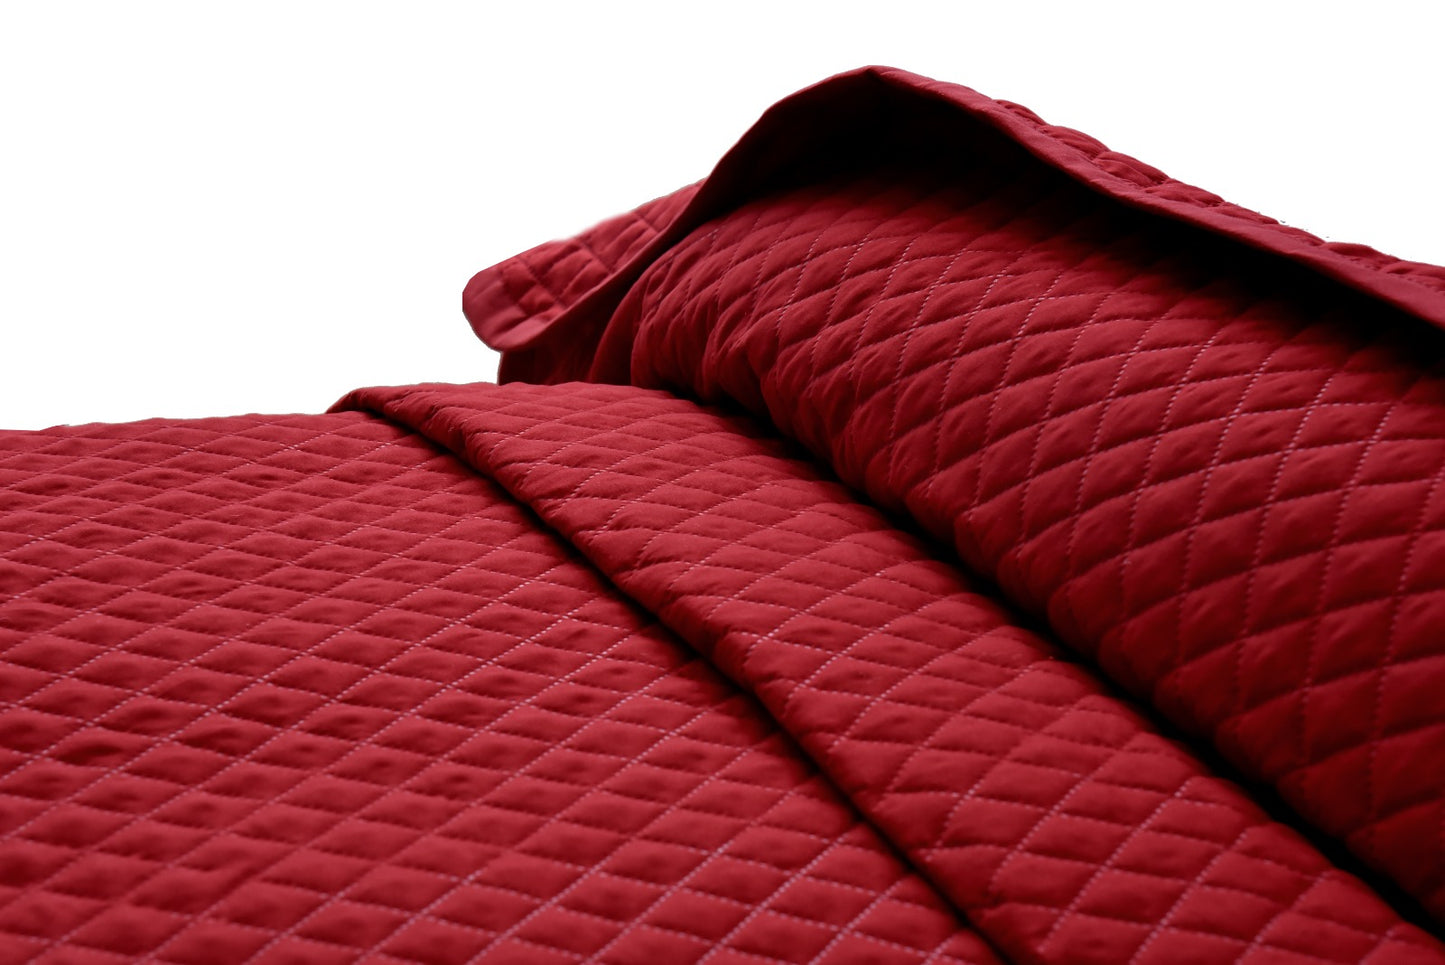 4 PCs Ultrasonic Quilted Luxury Bed Spread Set-Maroon Apricot